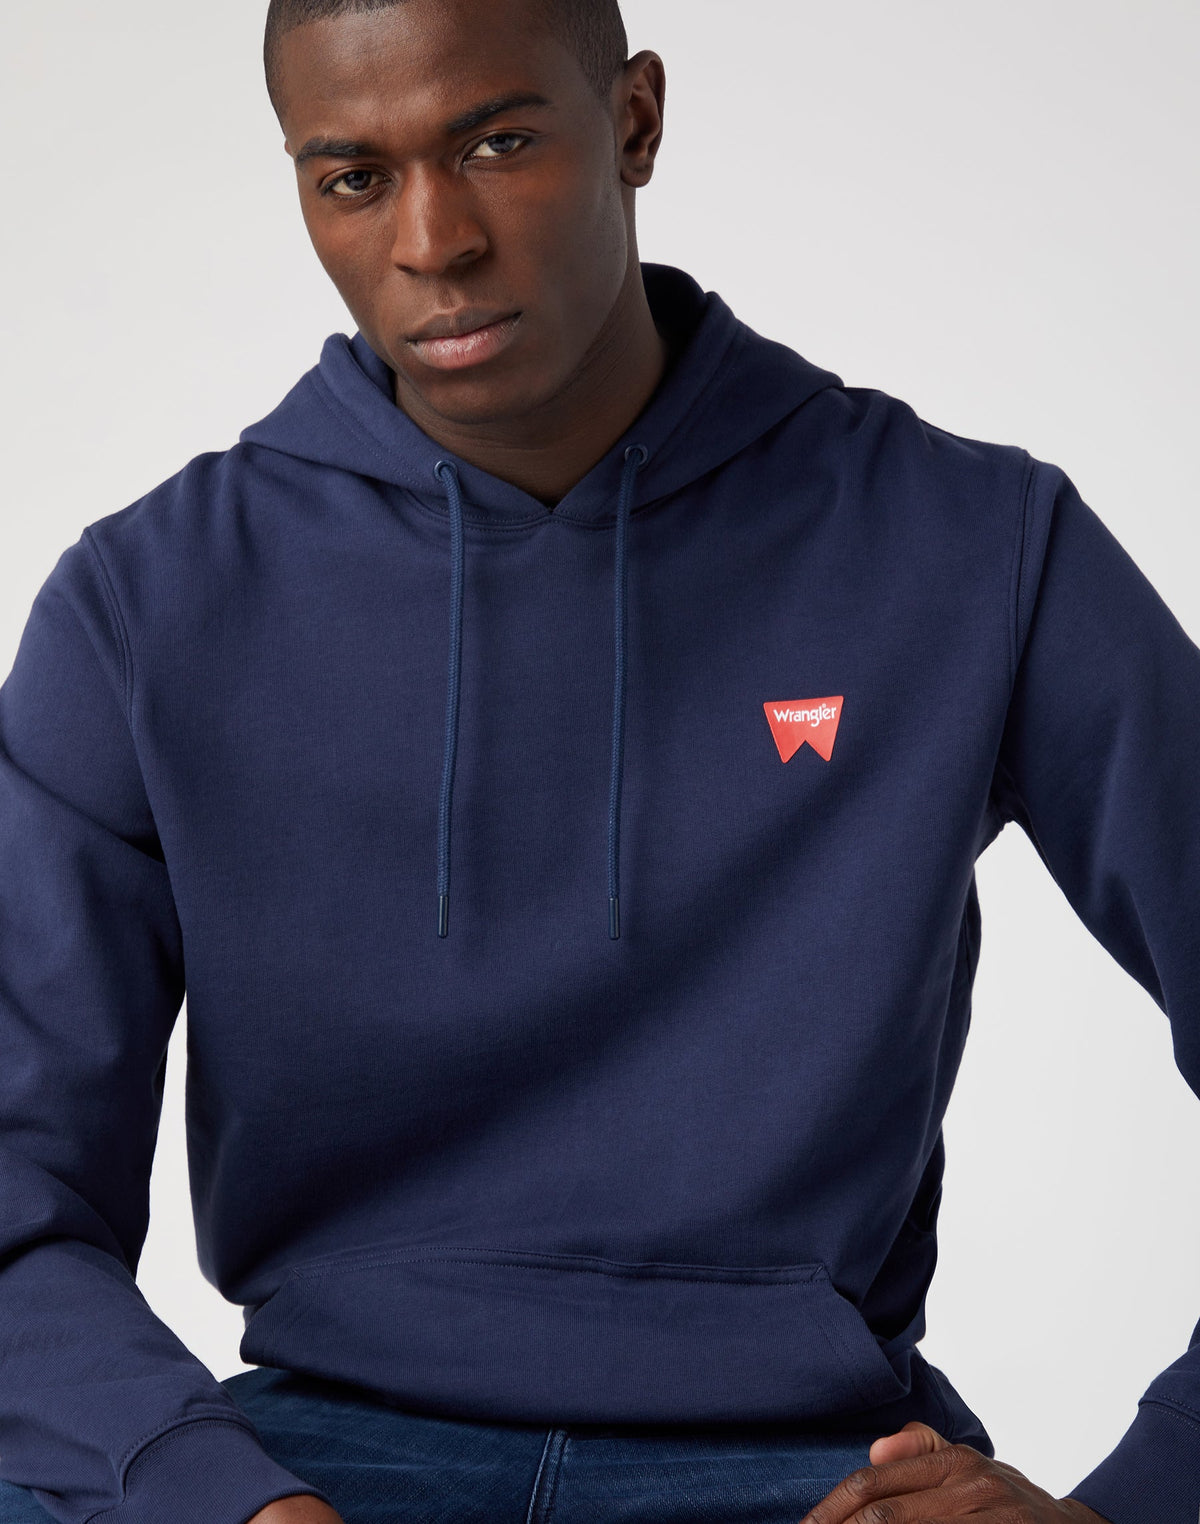 Sign Off Hoodie in Real Navy